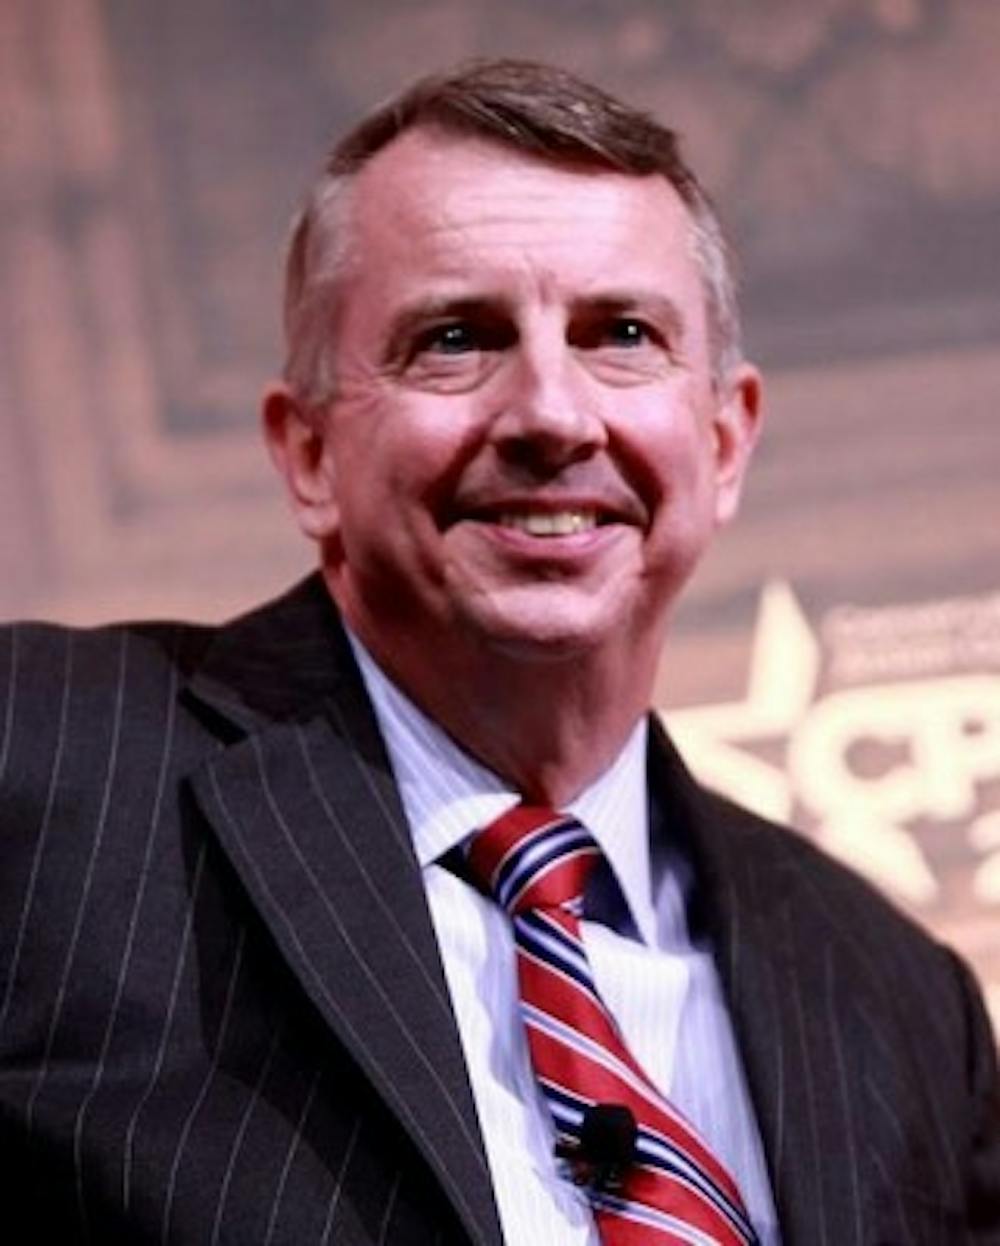 <p>Gillespie will go up against current Lt. Governor Ralph Northam for the position of governor in the November election.&nbsp;</p>